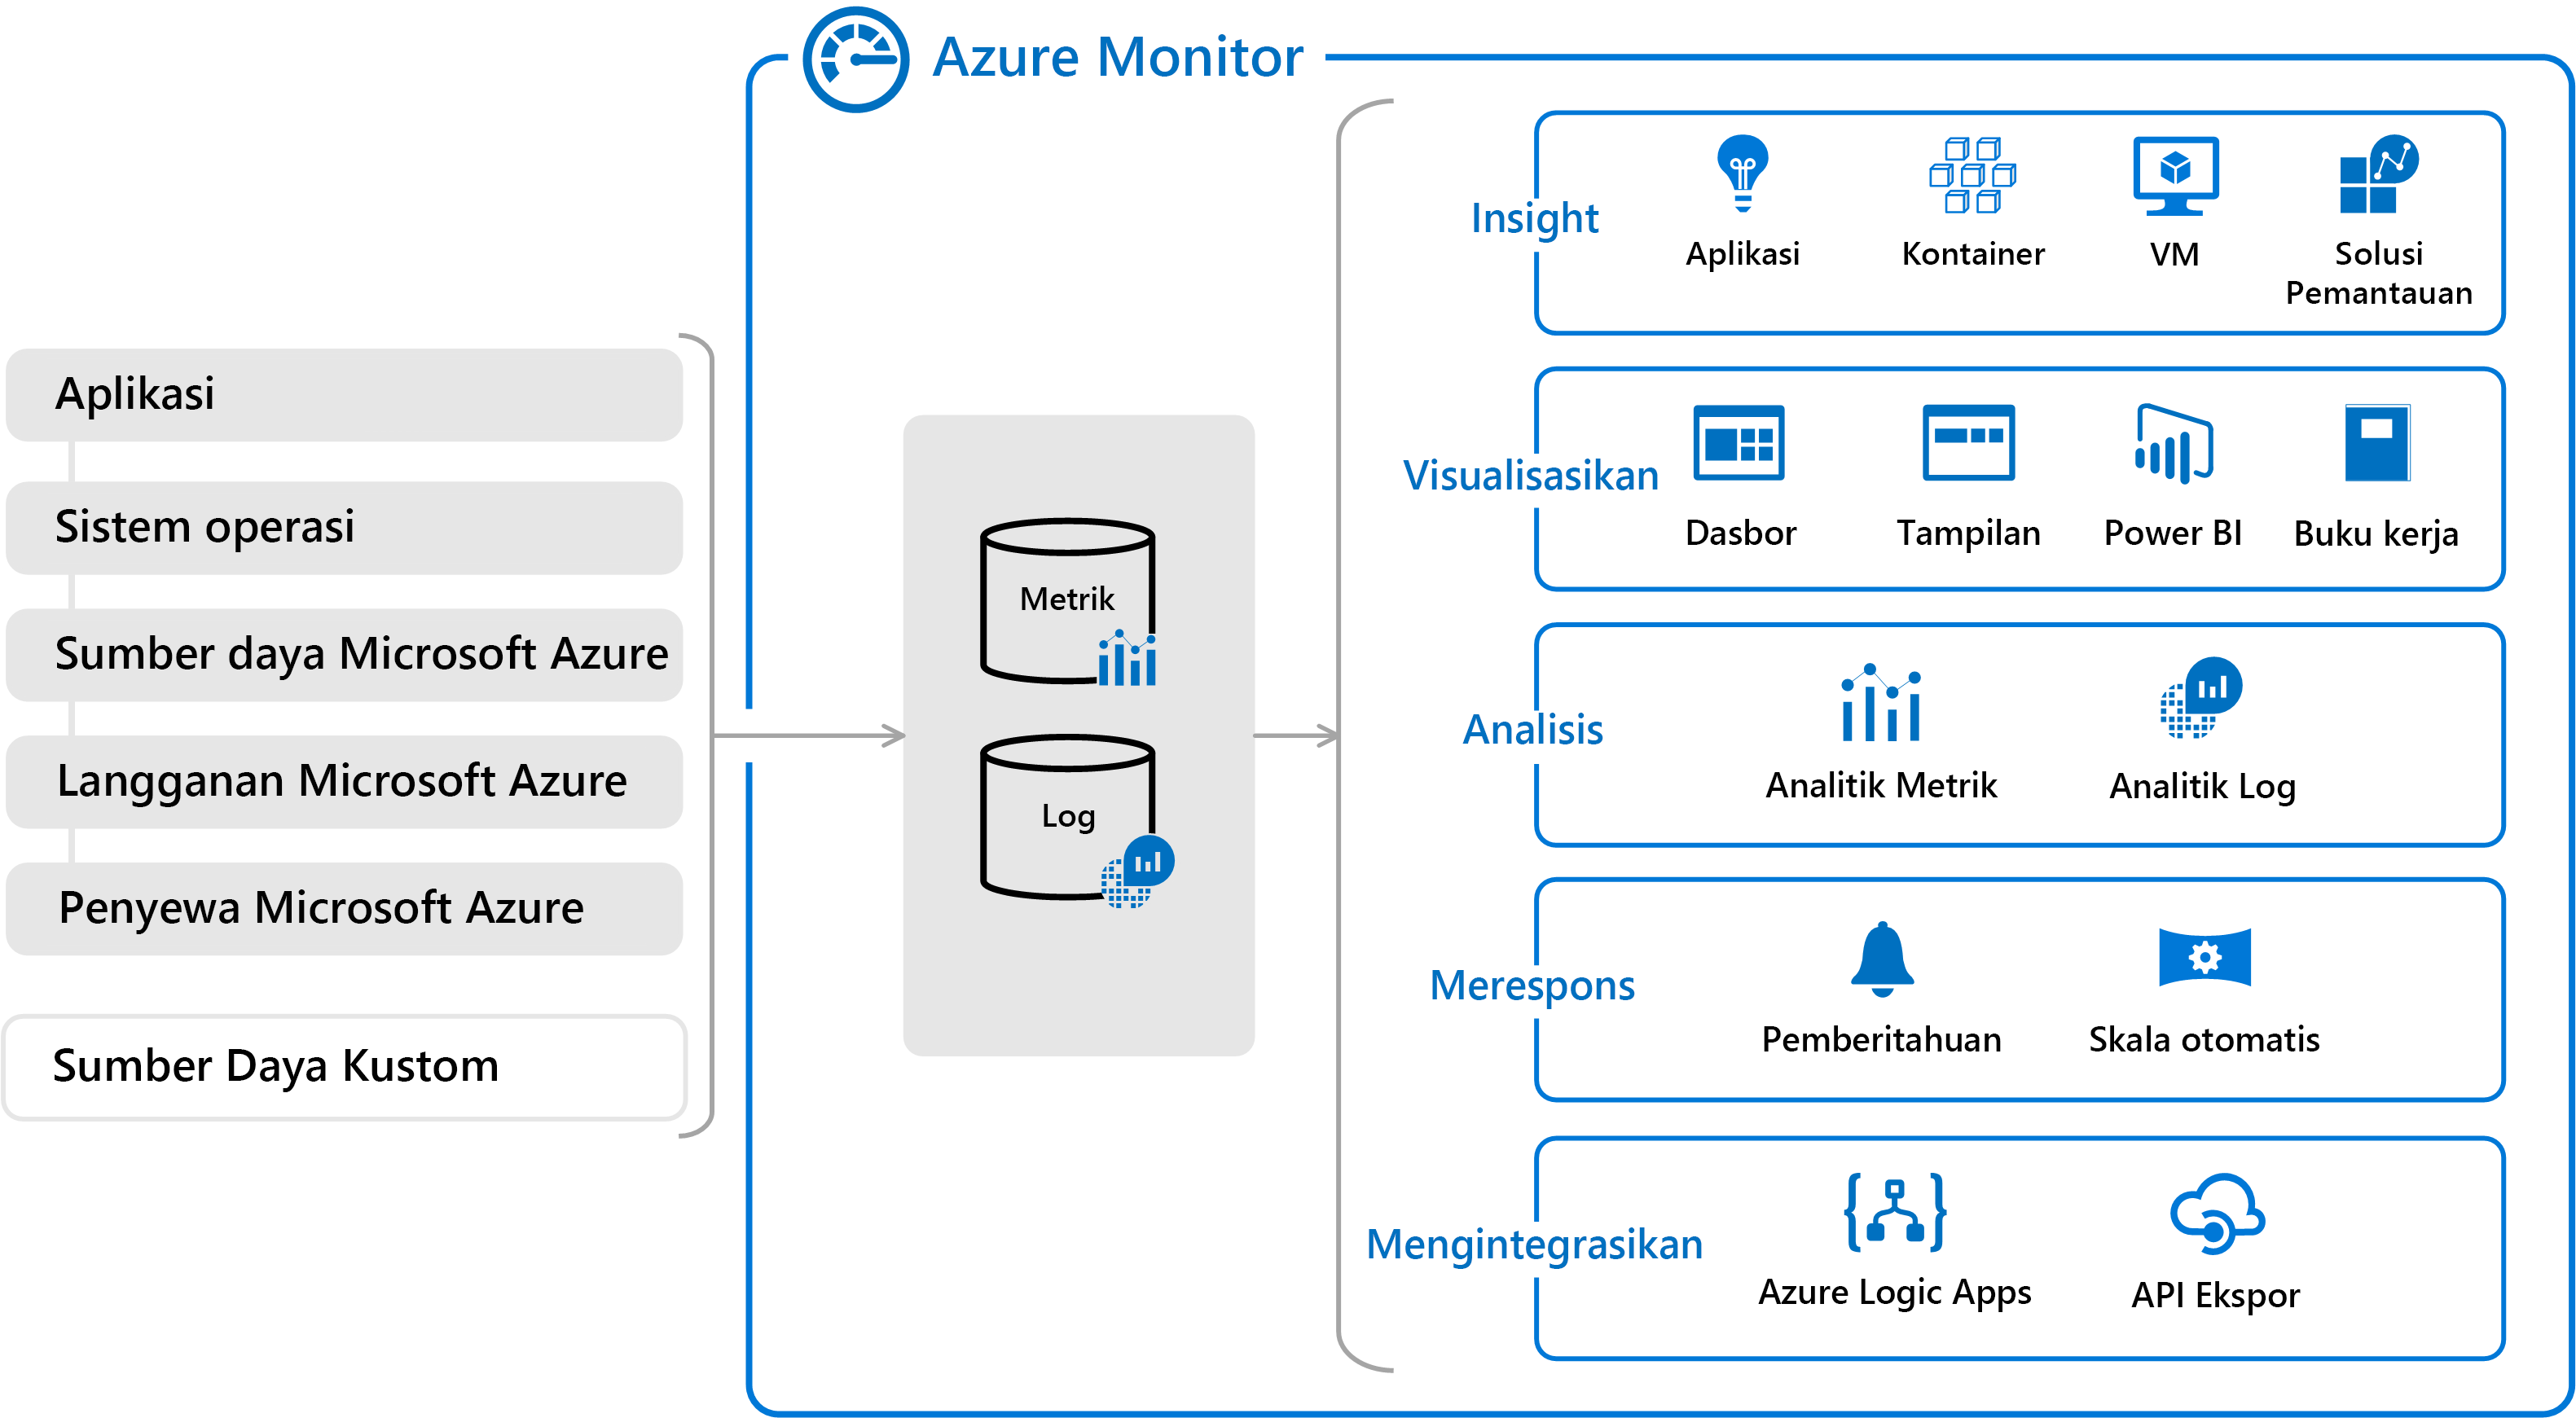 Azure Monitor high-level view showing sources of data and the functions performed on the data.